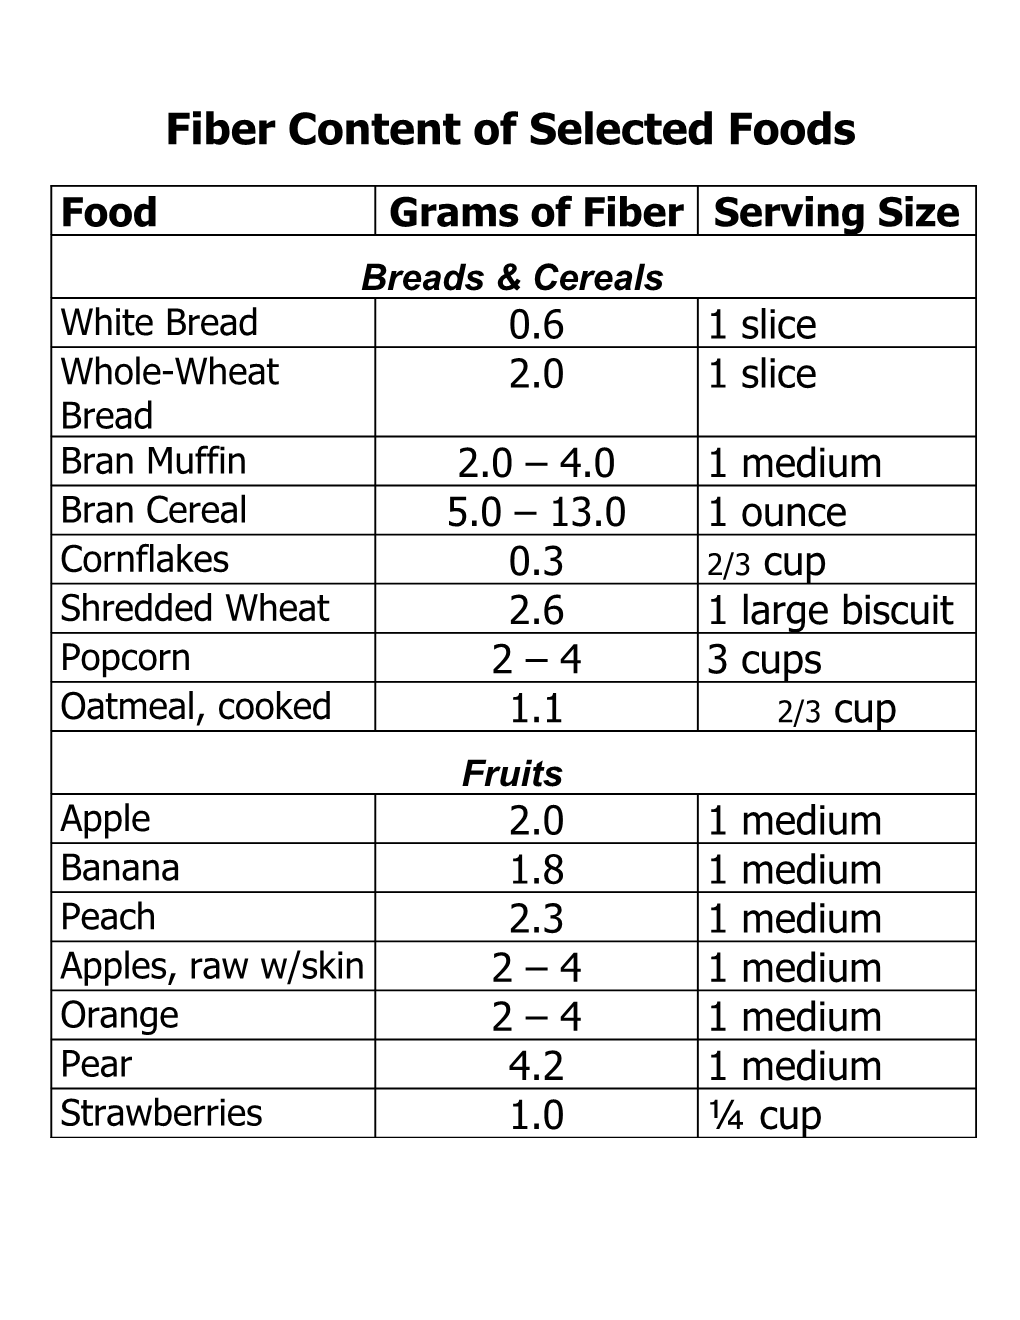 Fiber Content of Selected Foods